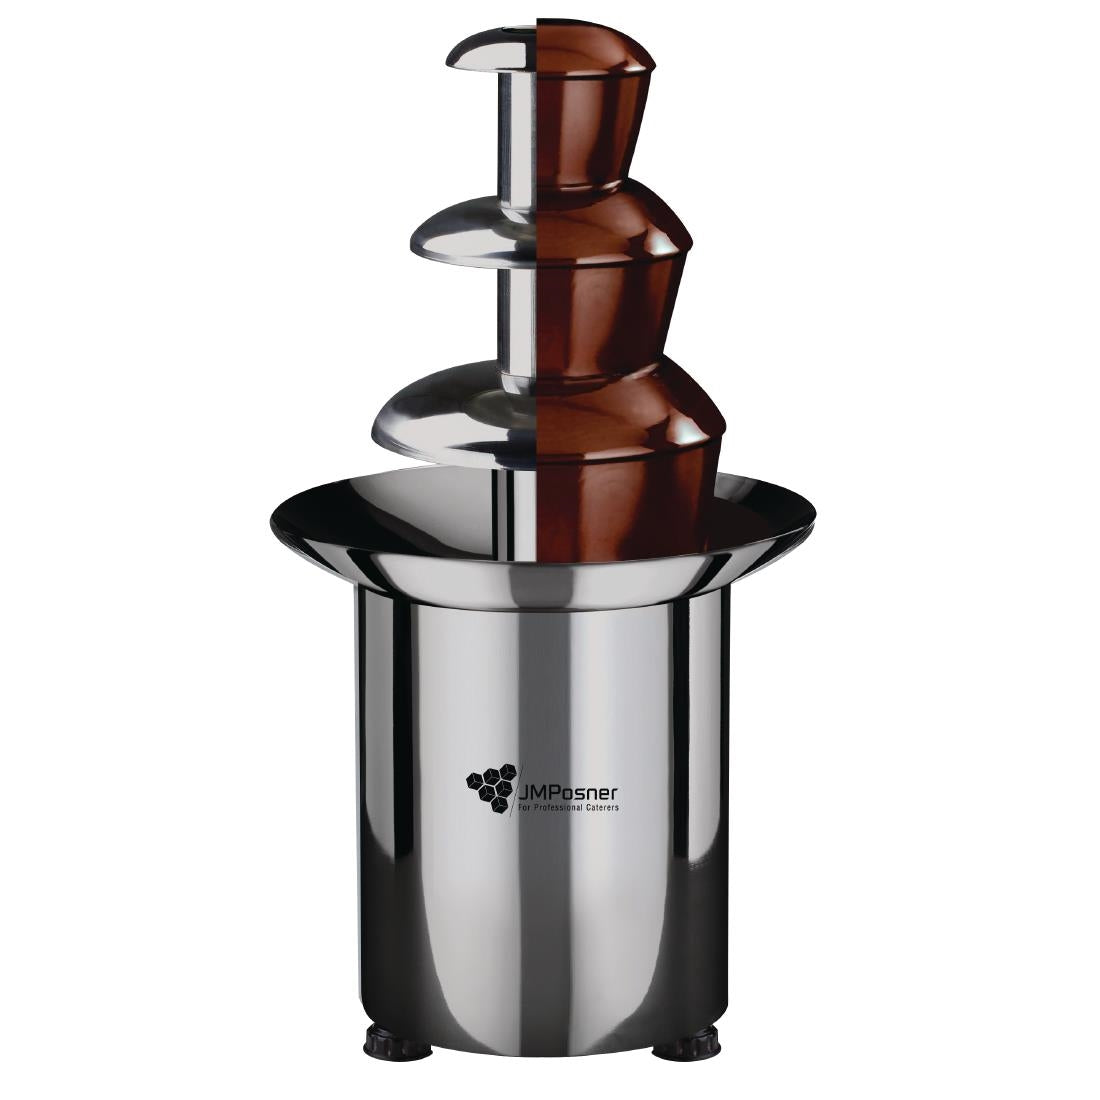 CP734 JM Posner Battery Chocolate Fountain TTOP JD Catering Equipment Solutions Ltd